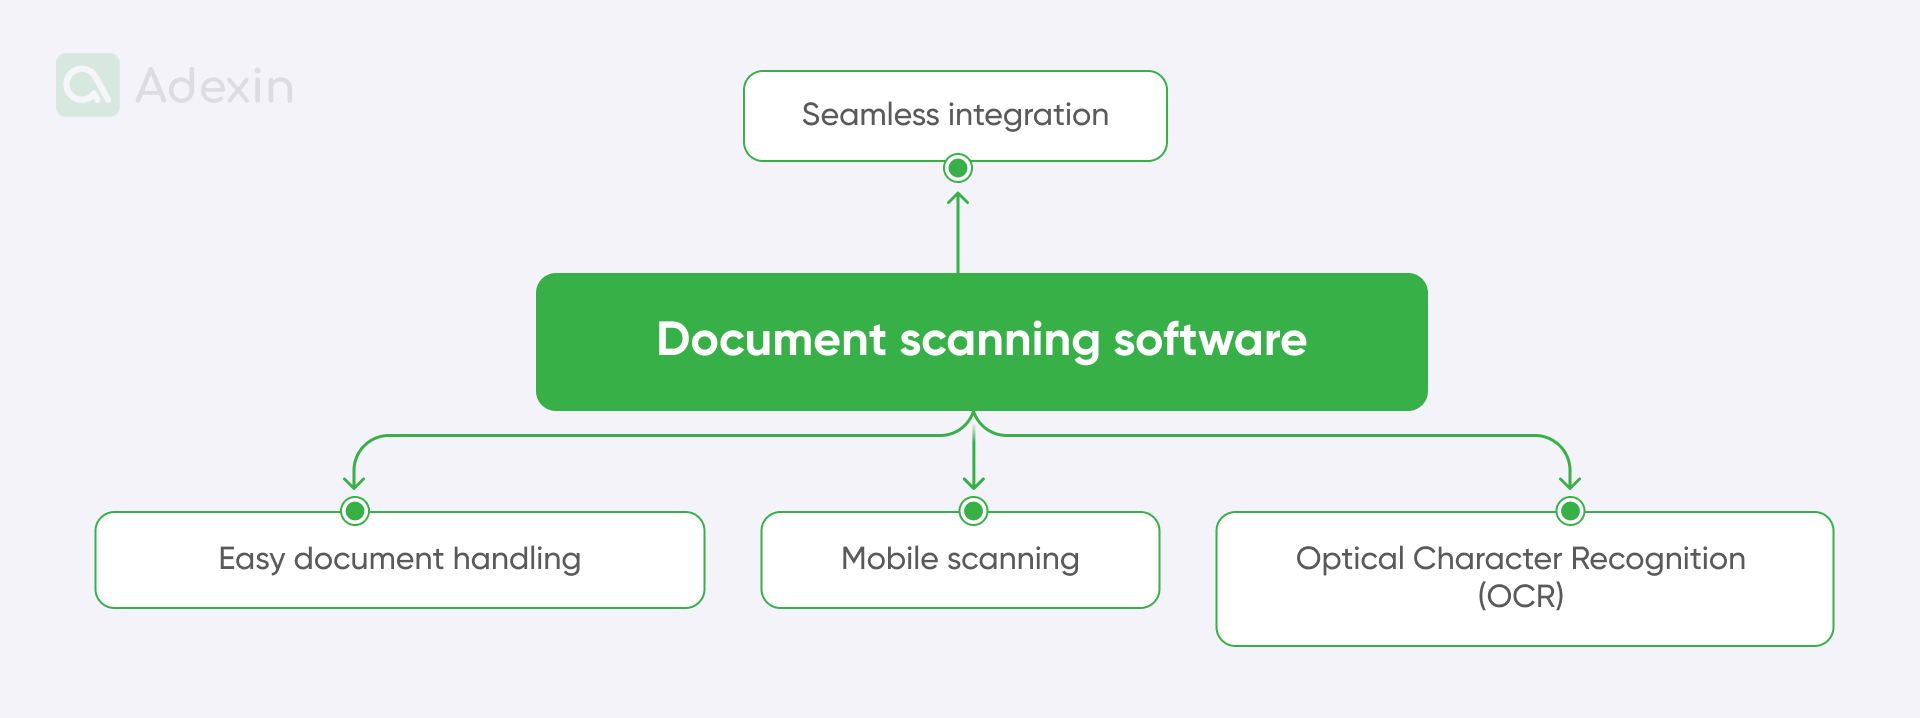 Types of document scanning software